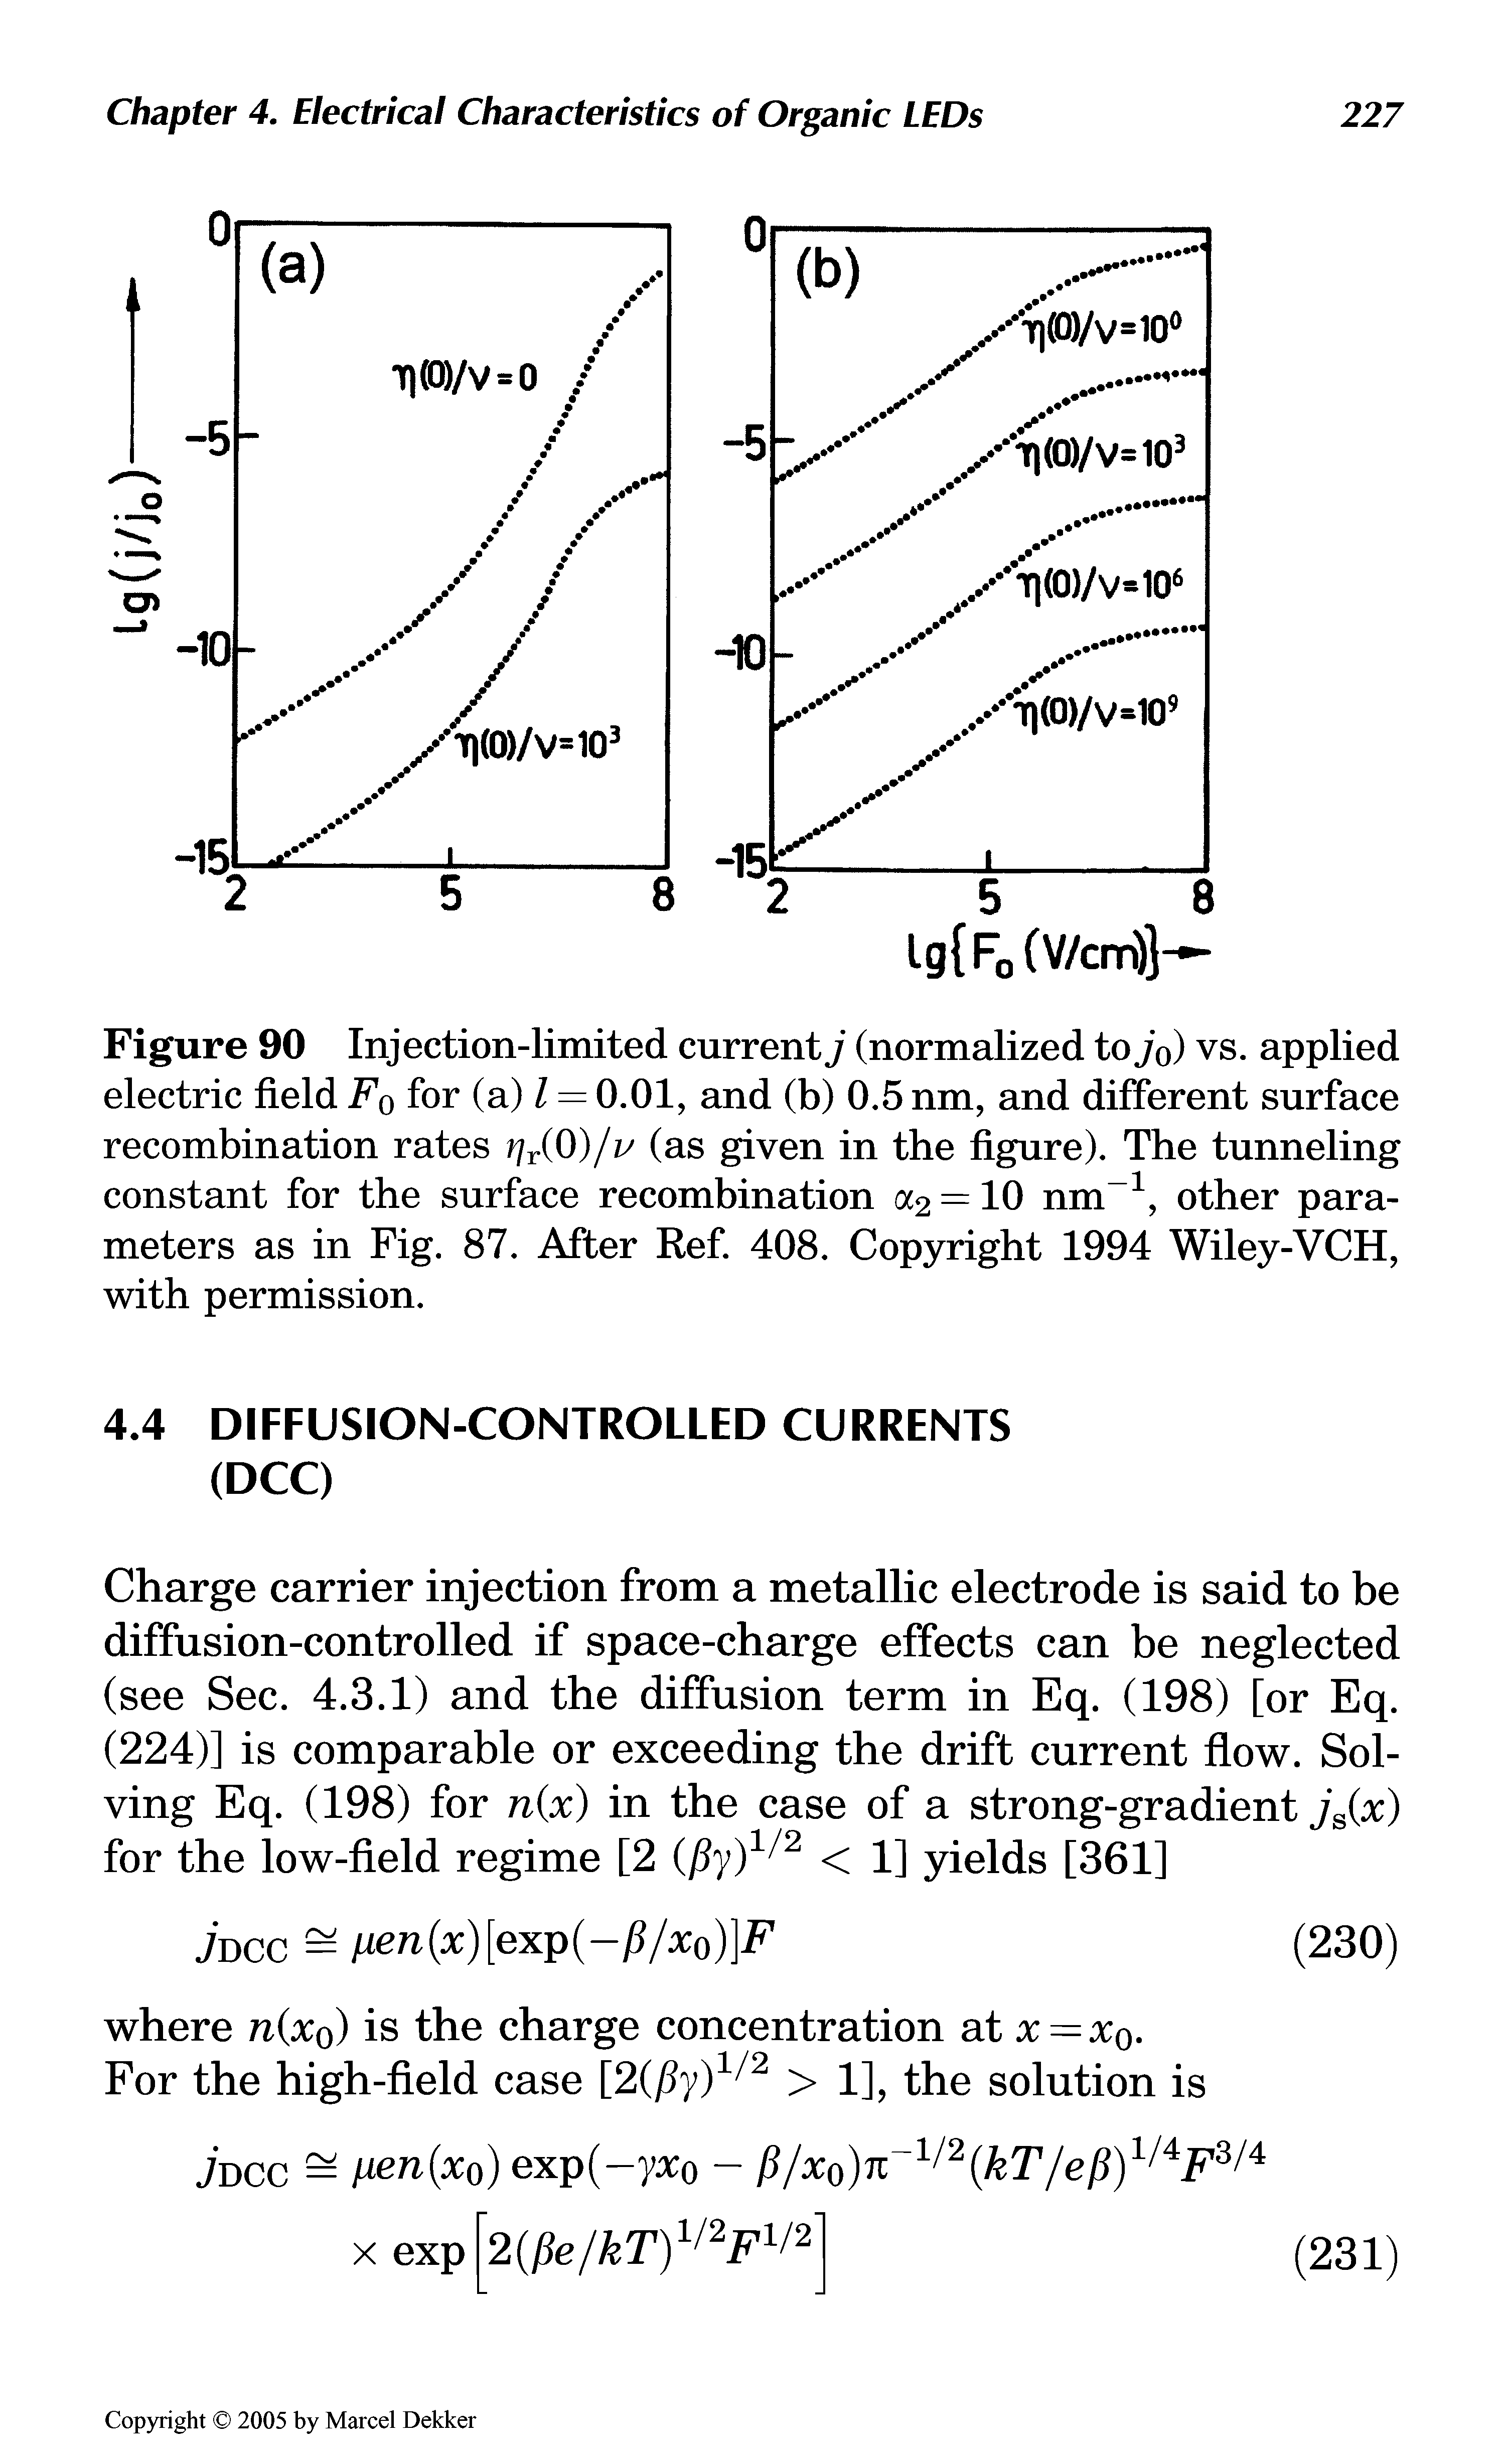 Figure 90 Injection-limited current j (normalized to jo) vs. applied electric field Fo for (a) l = 0.01, and (b) 0.5 nm, and different surface recombination rates tir(0)/is (as given in the figure). The tunneling constant for the surface recombination o<2 = 10 nm-1, other parameters as in Fig. 87. After Ref. 408. Copyright 1994 Wiley-VCH, with permission.